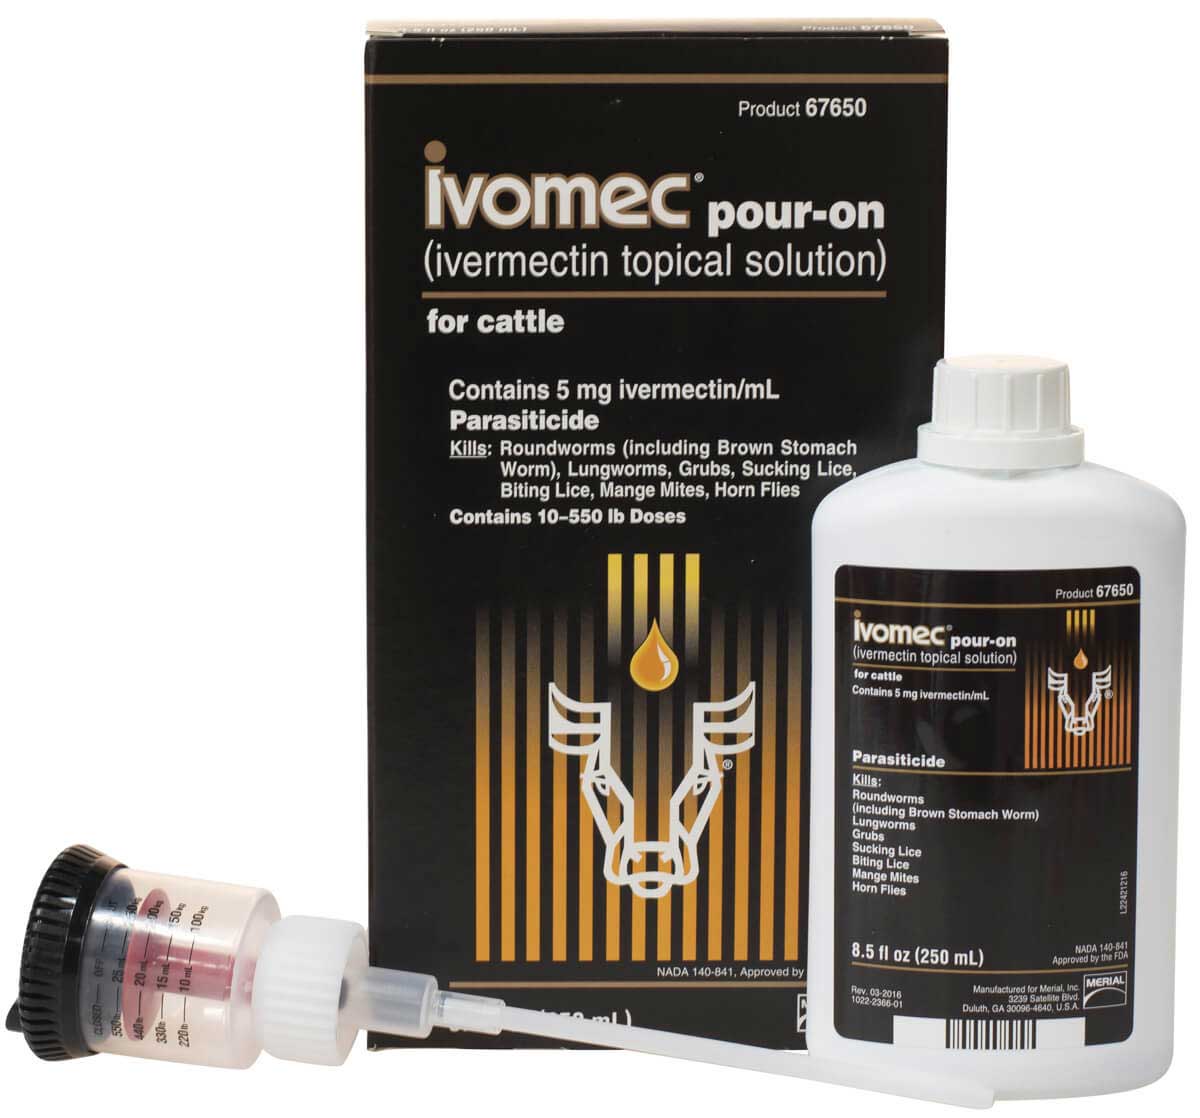 Ivomec Pour-On Parasiticide For Cattle Boehringer Ingelheim - Pour-On |  Ivermectins | Cattle Deworme